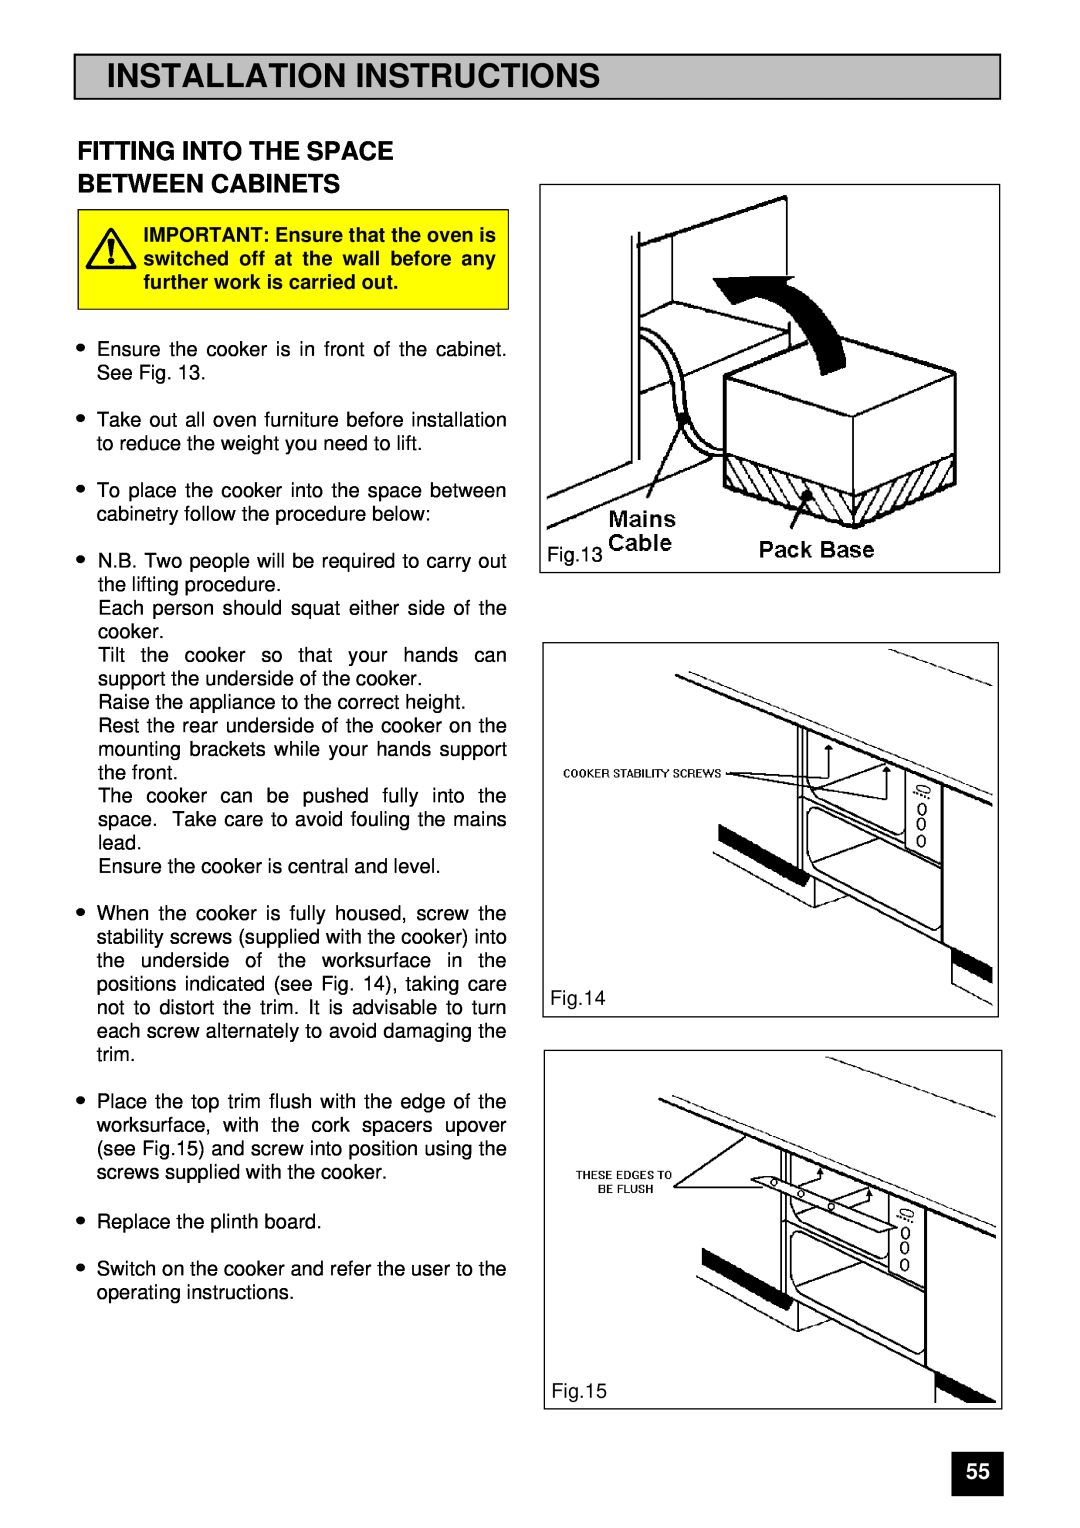 Tricity Bendix E 750 installation instructions Fitting Into The Space Between Cabinets, Installation Instructions 